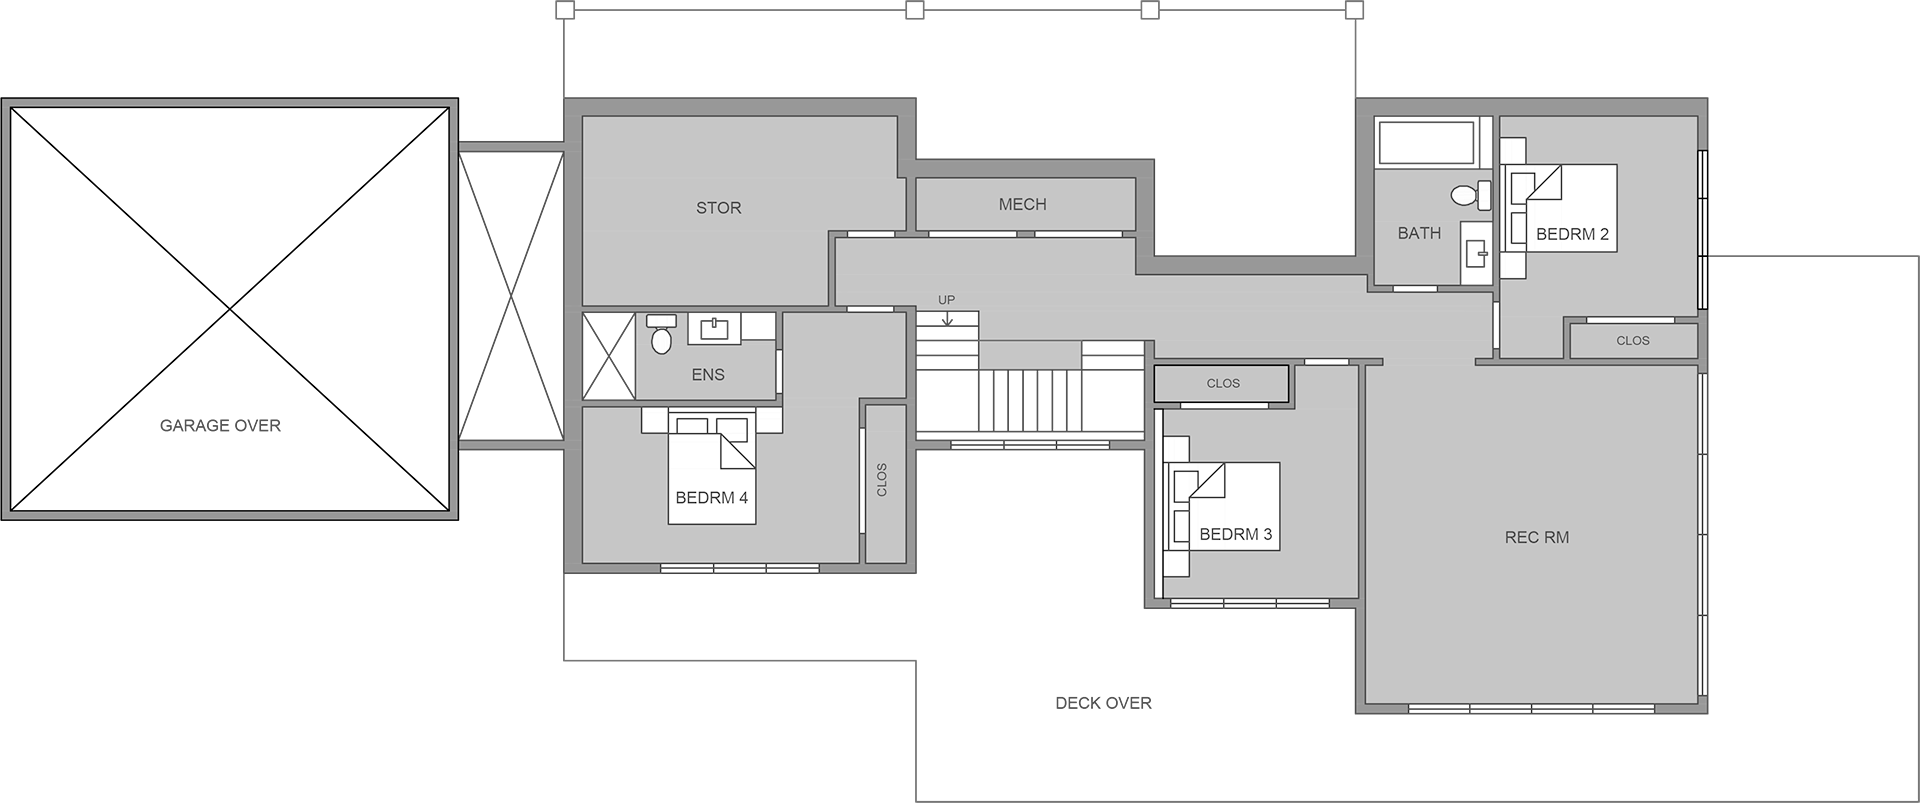 ground floor plan of BC Lake Front house